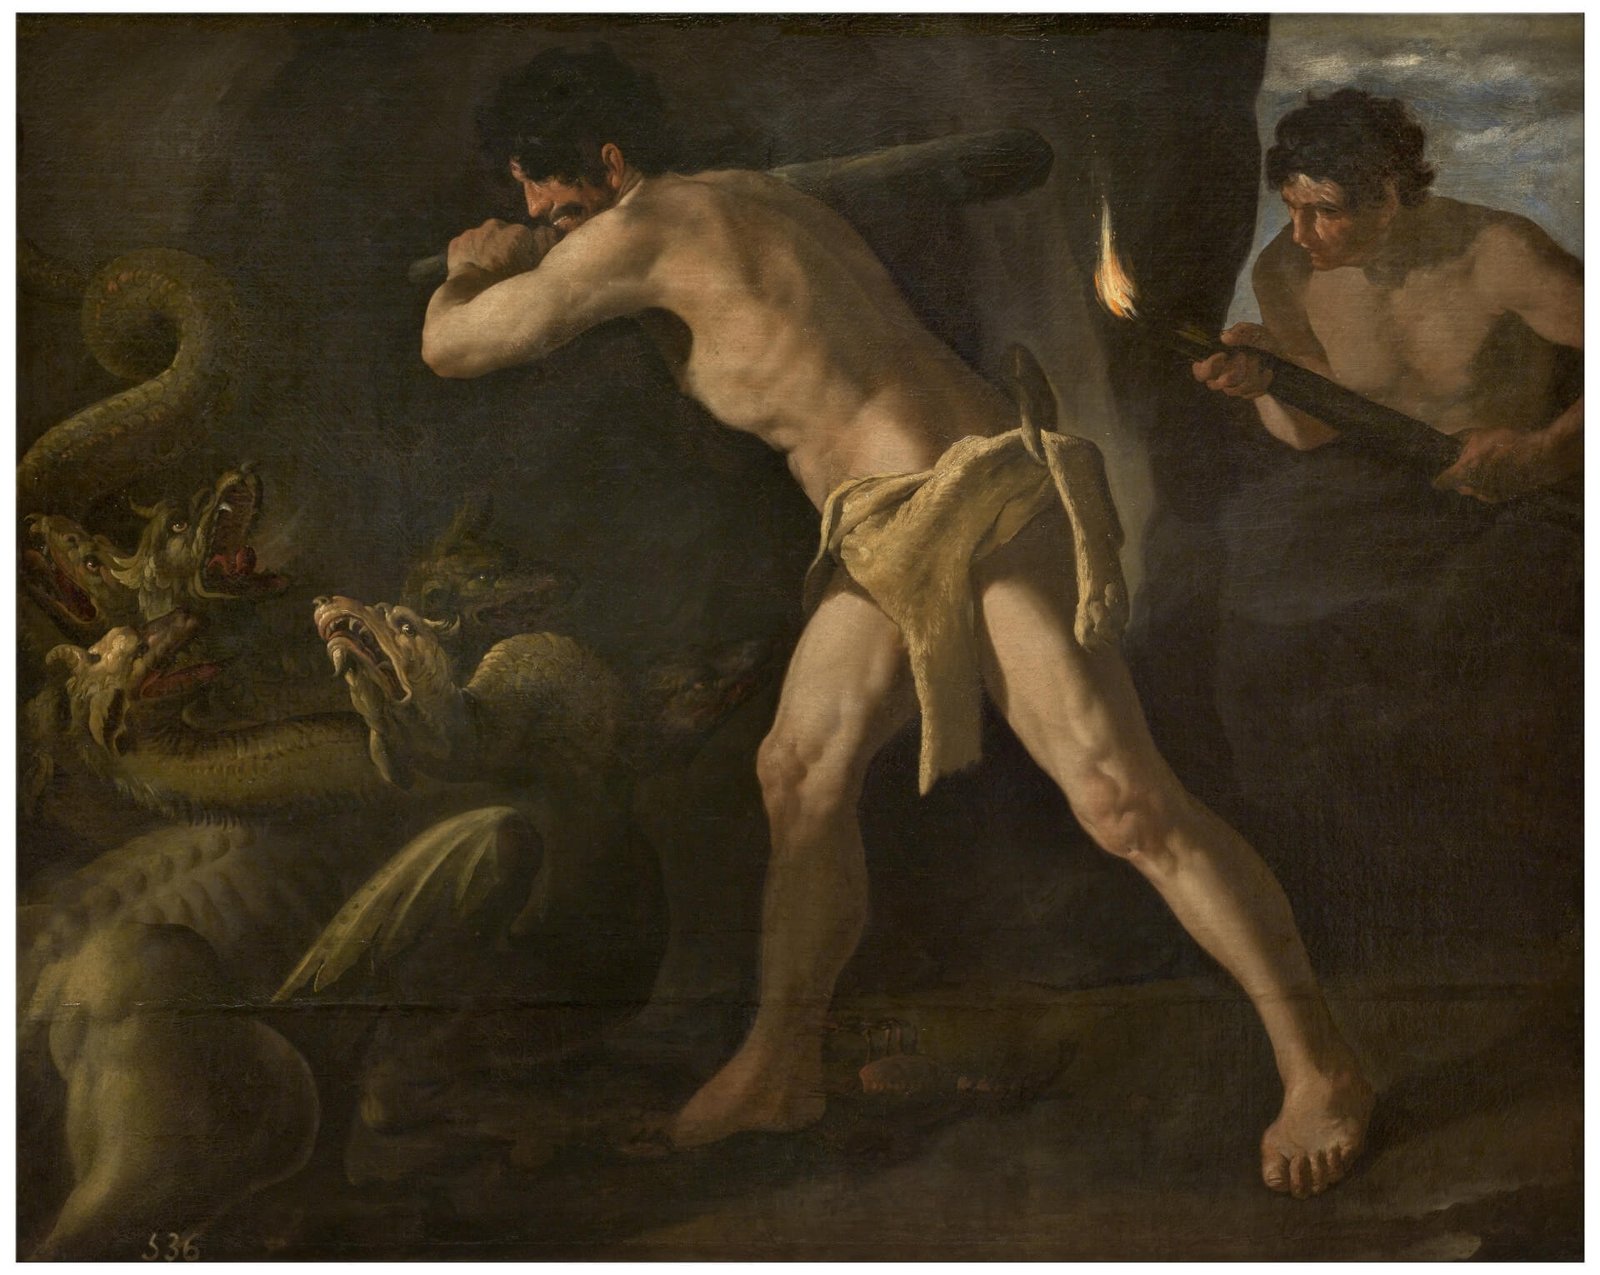 This painting represents Heracles fighting the Lernaean Hydra.